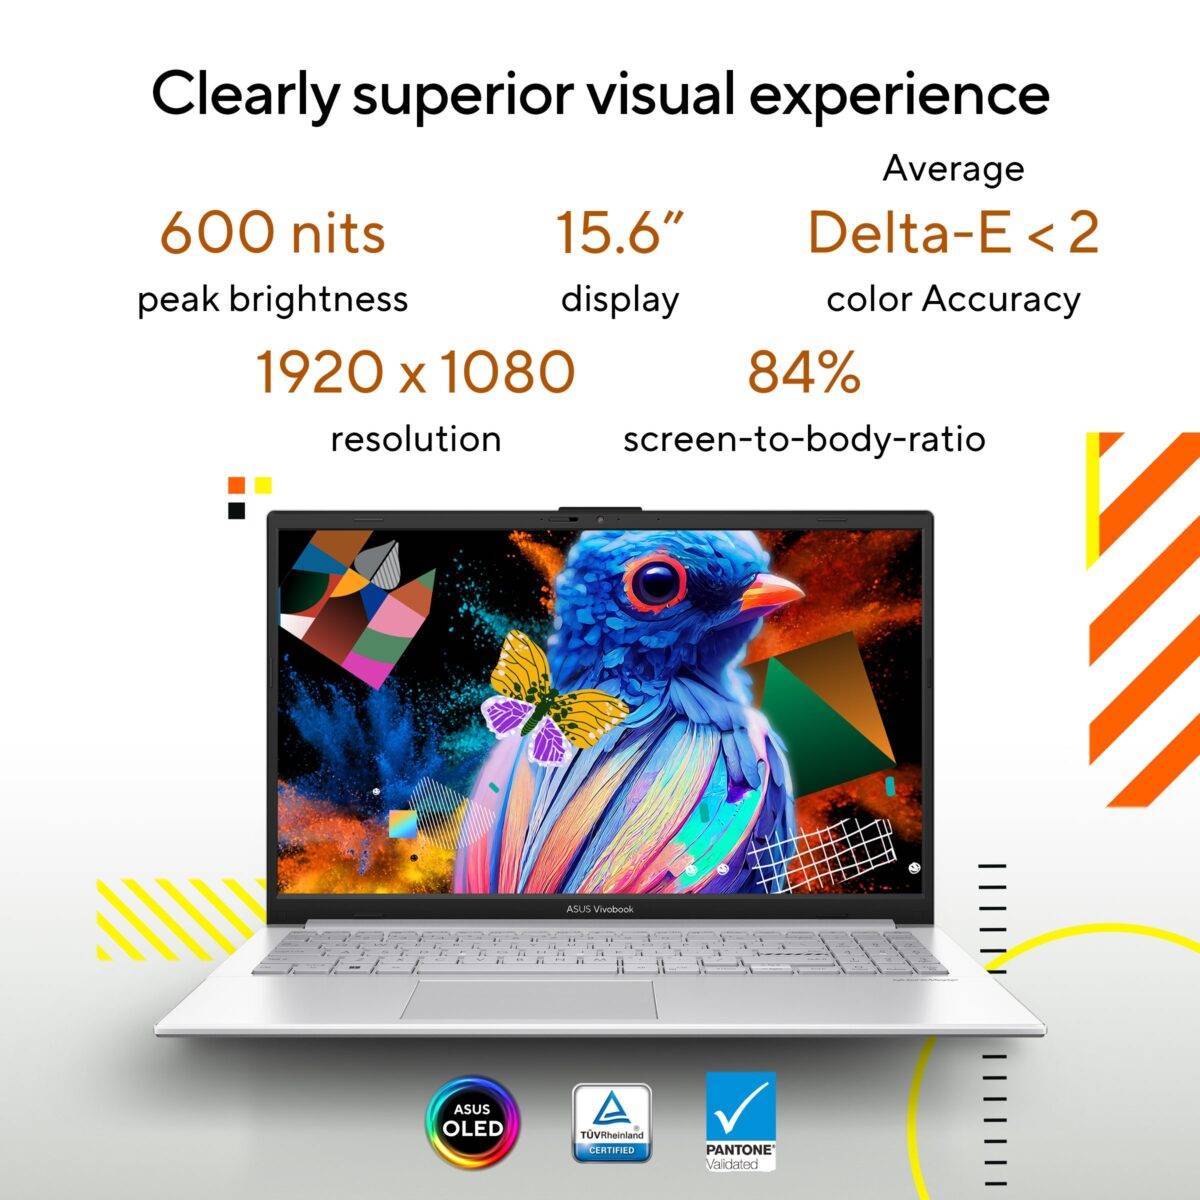 15.6 inch OLED display, 16:9 aspect ratio, 1920 by 1080 resolution, 84% screen-to-body ratio, 100% DCI-P3, 600 nits peak brightness for clearly superior visual experience